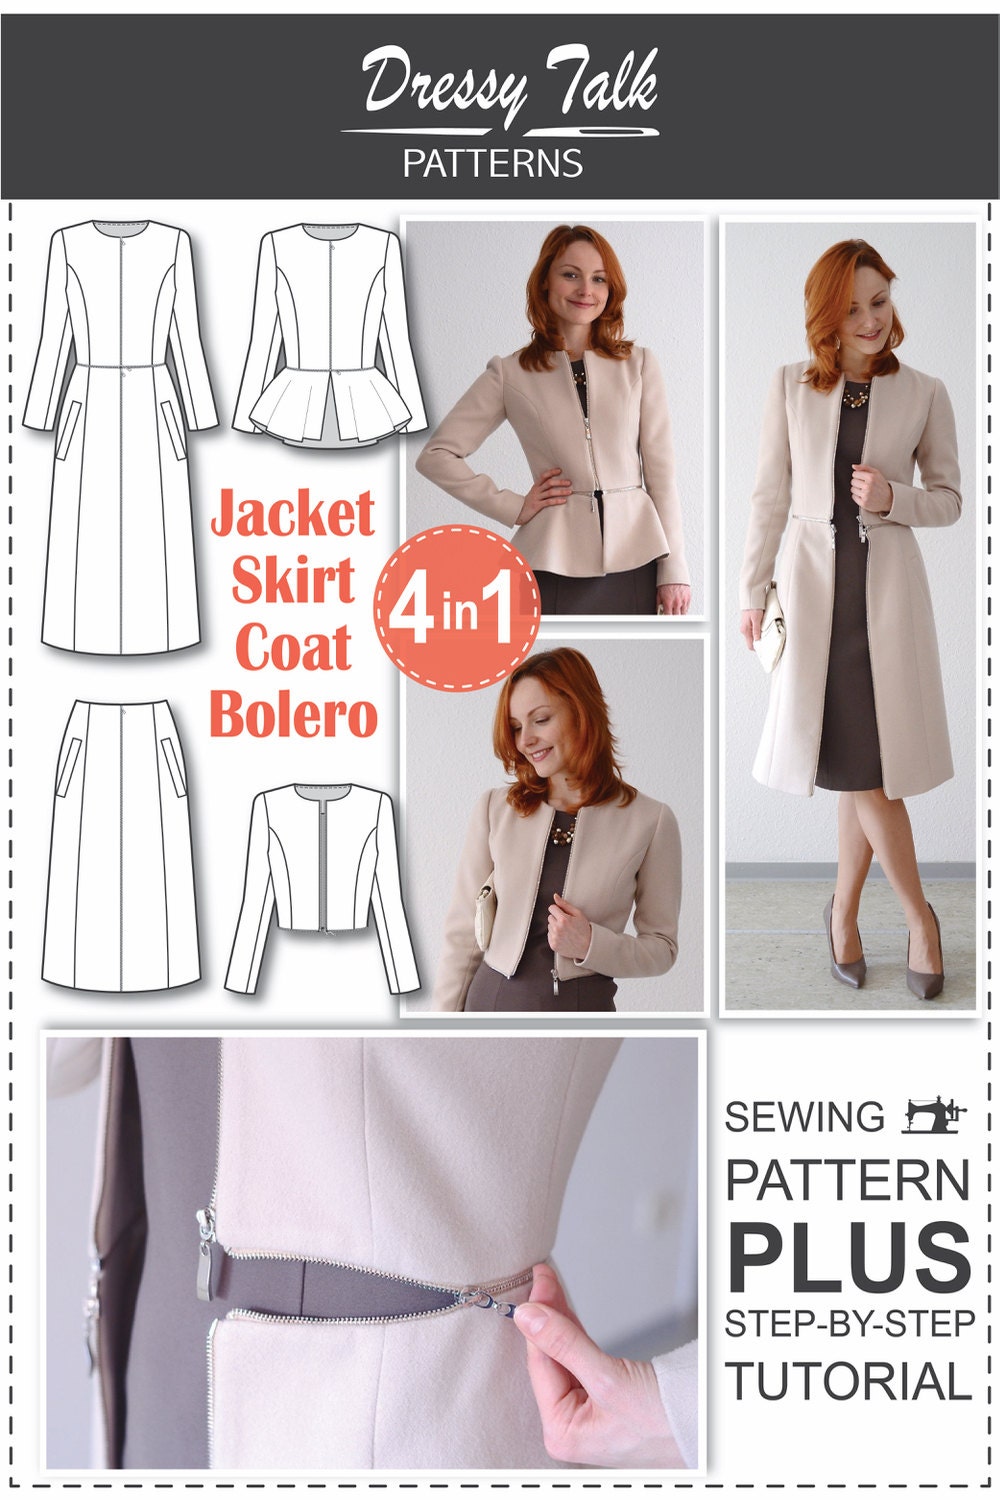 How Much Wearing Ease Should a Coat Have? sewing discussion topic @  PatternReview.com